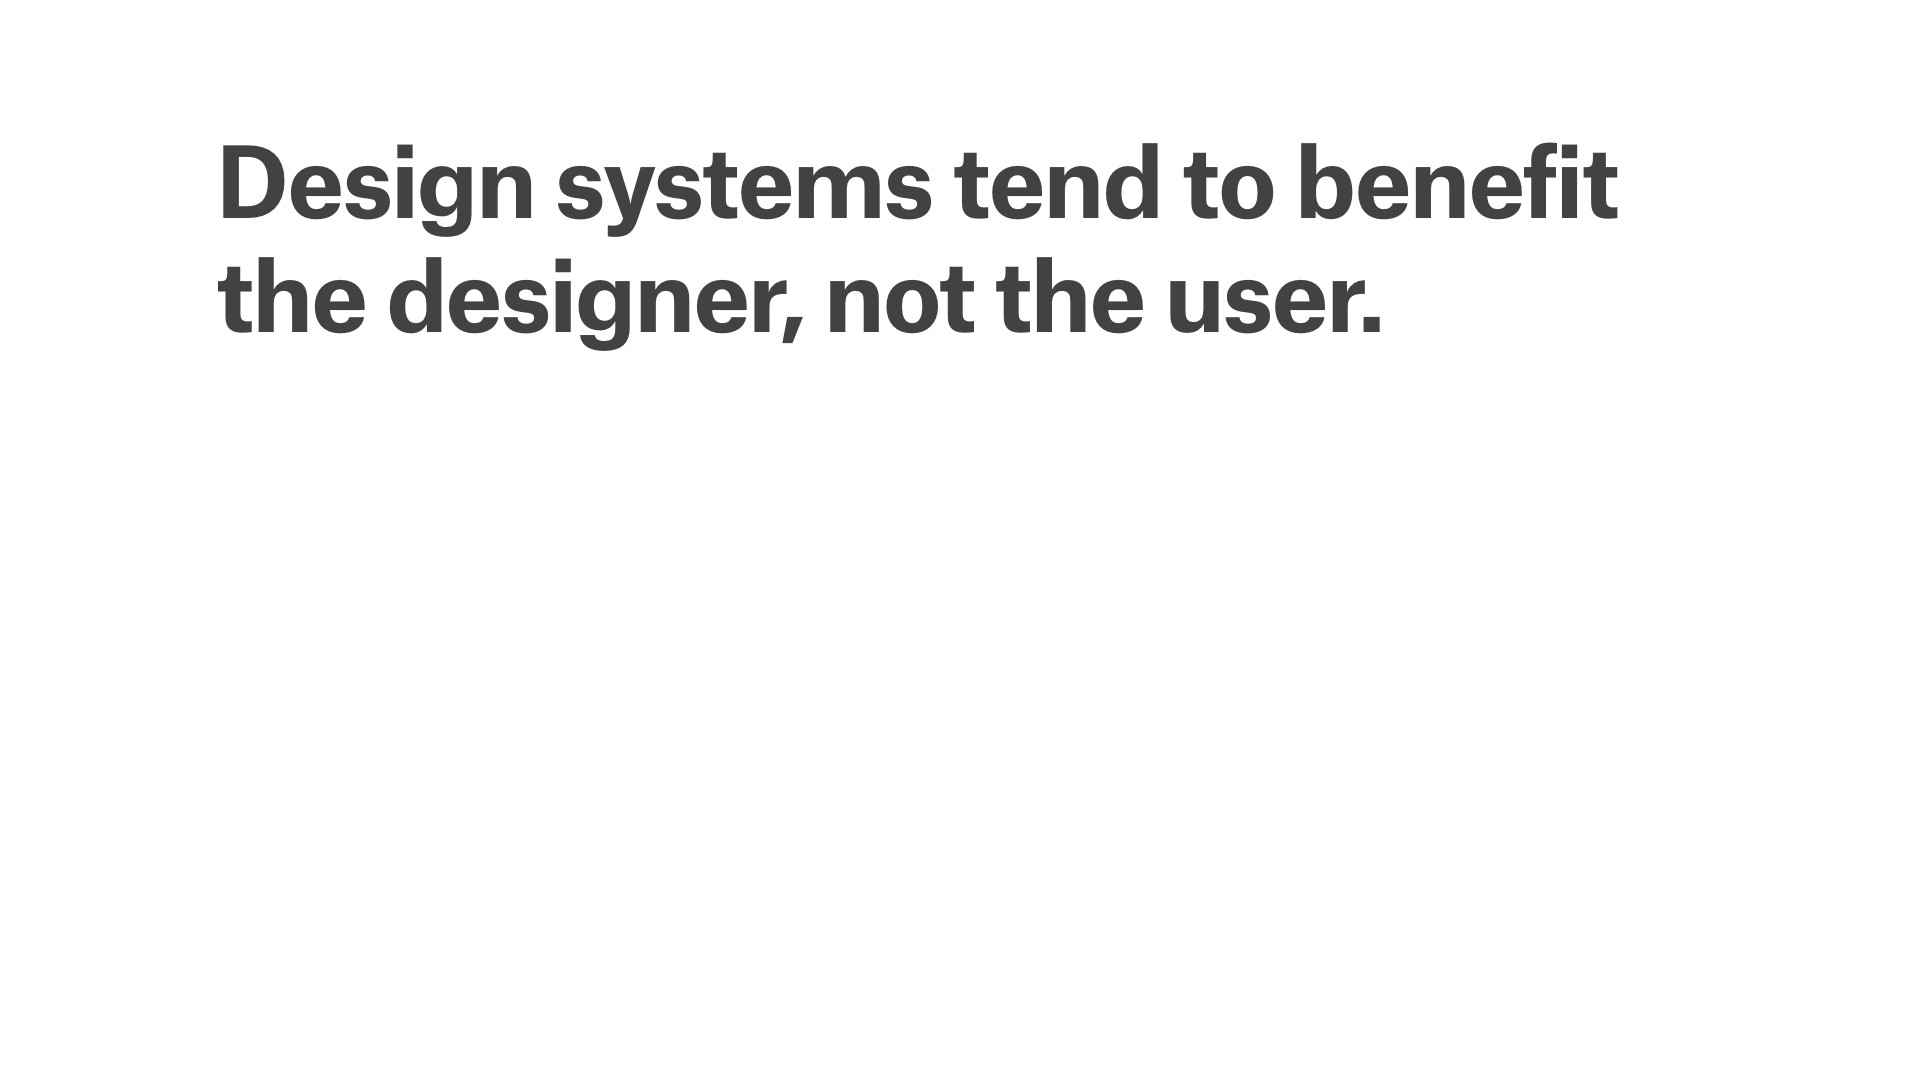 Design systems tend to benefit the designer, not the user.